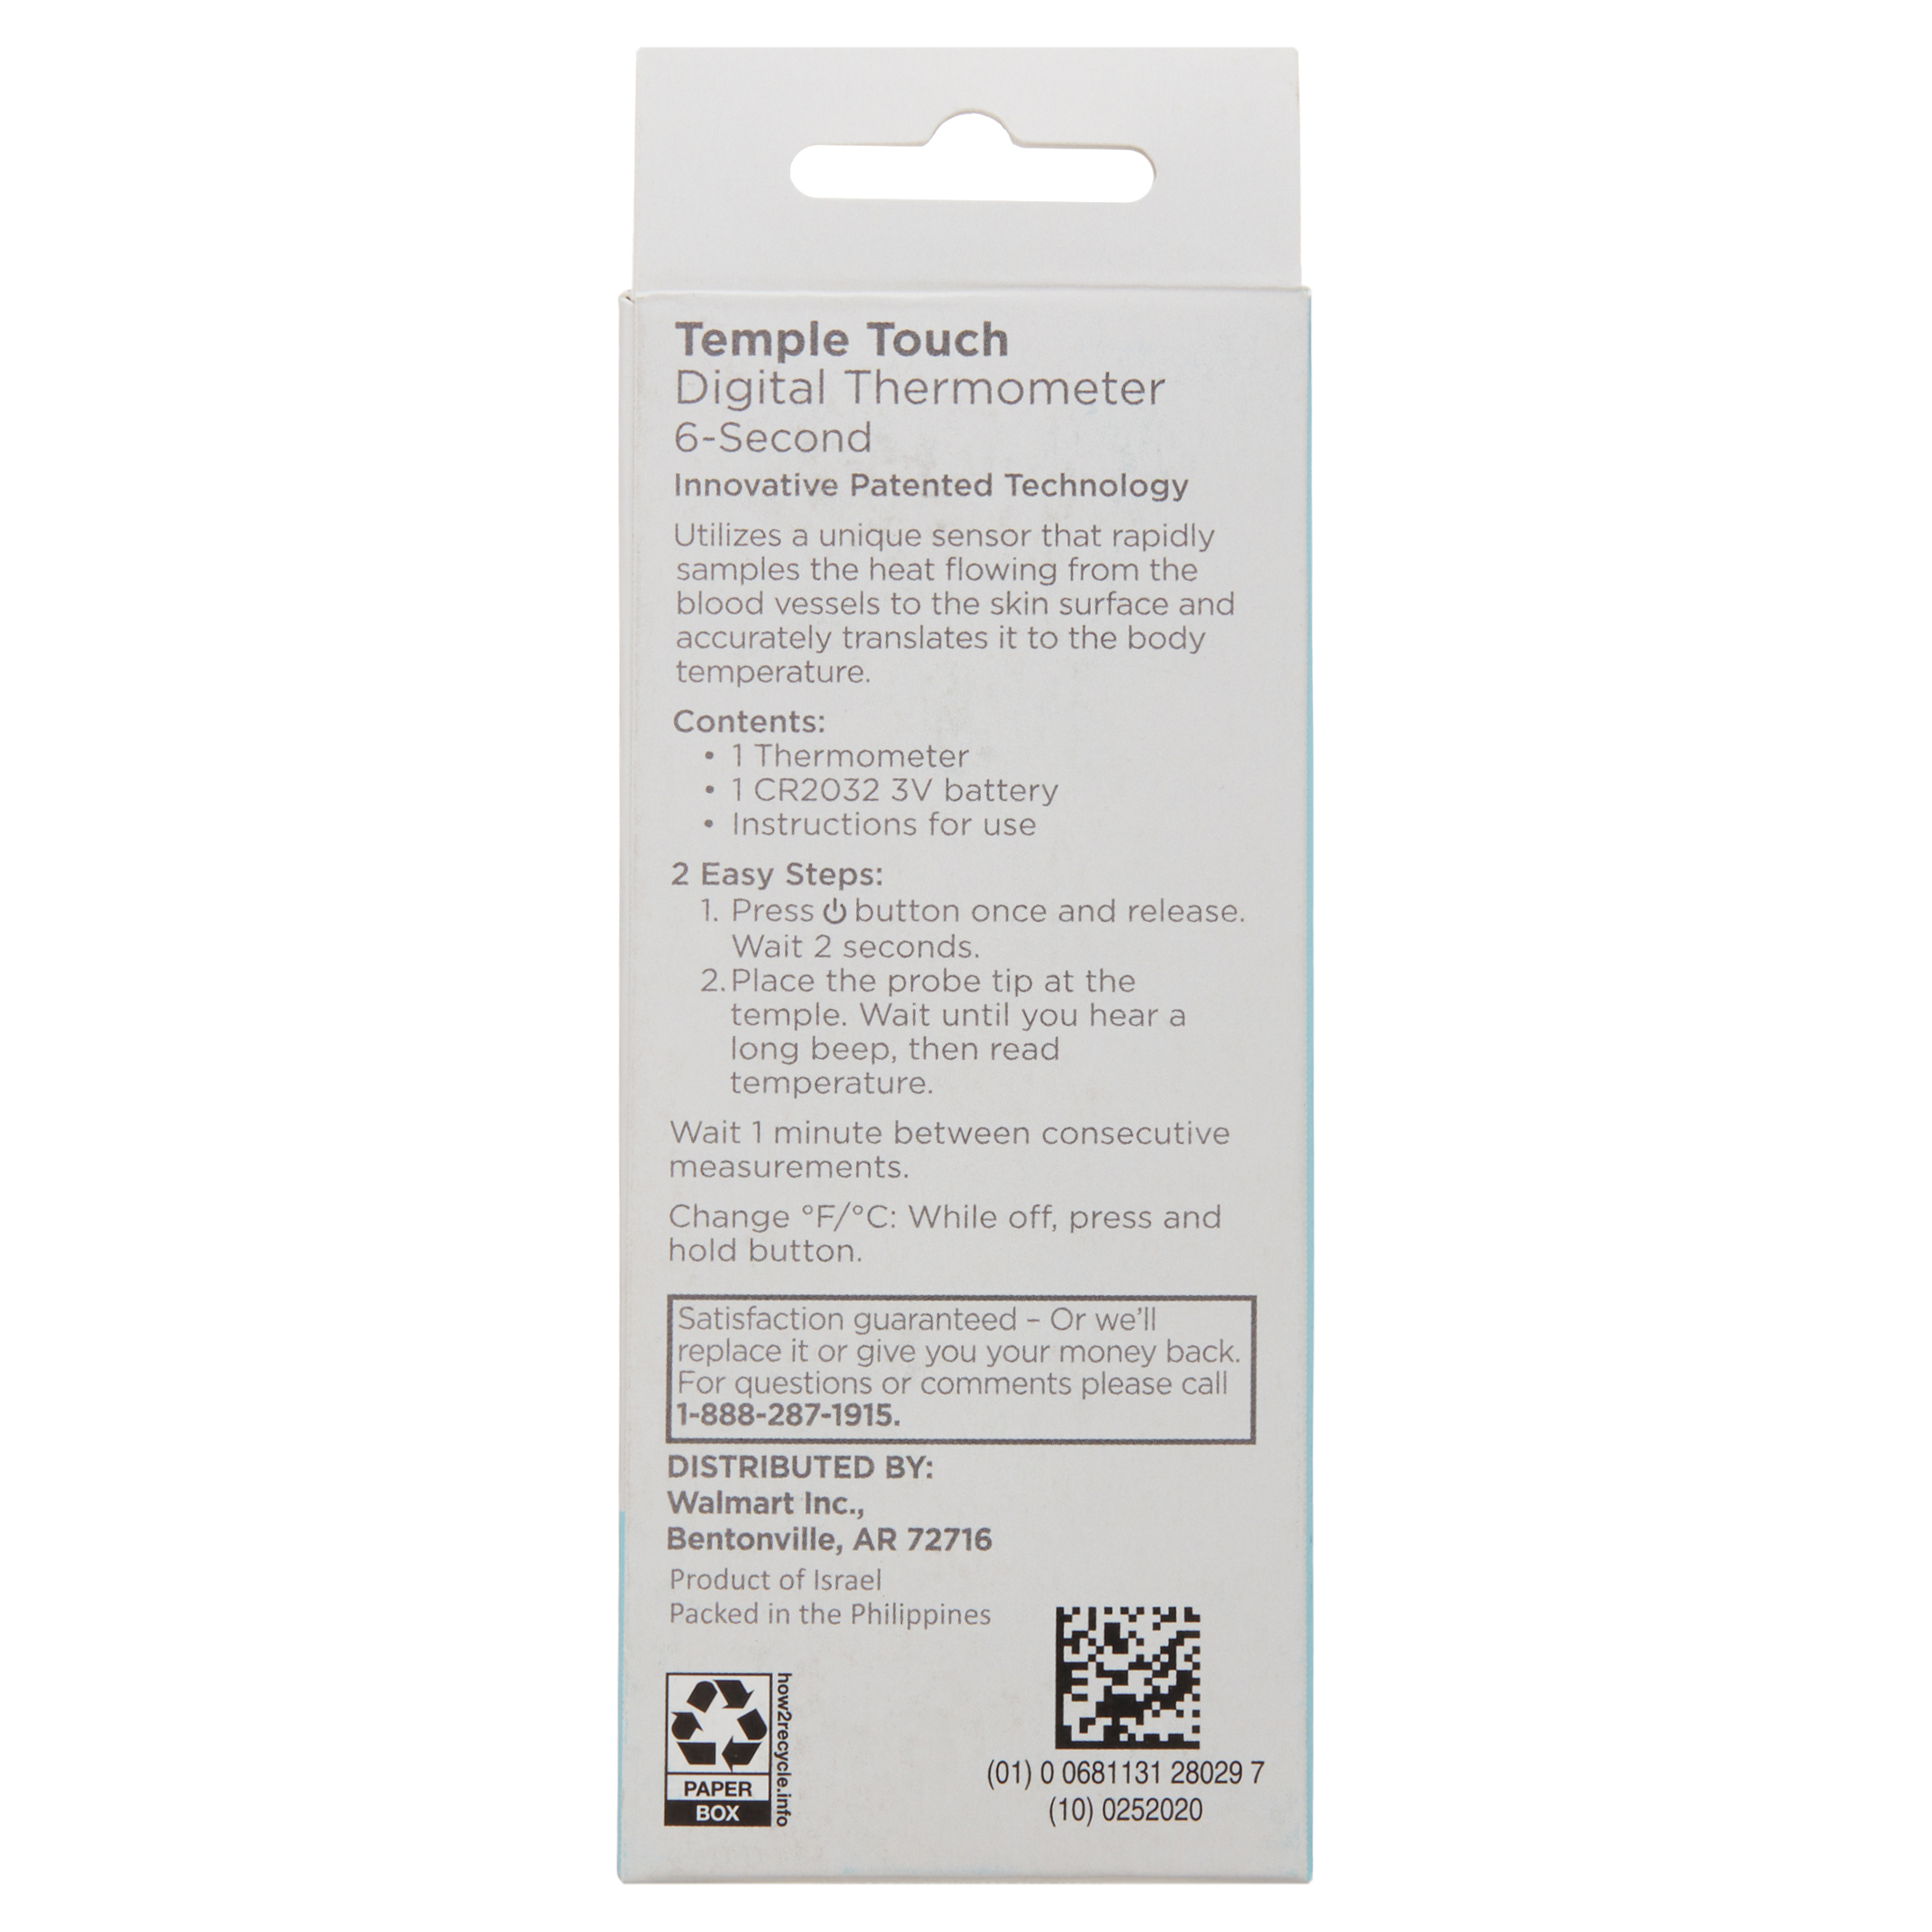 Equate Temple Touch 6-Second Digital Thermometer - image 4 of 6